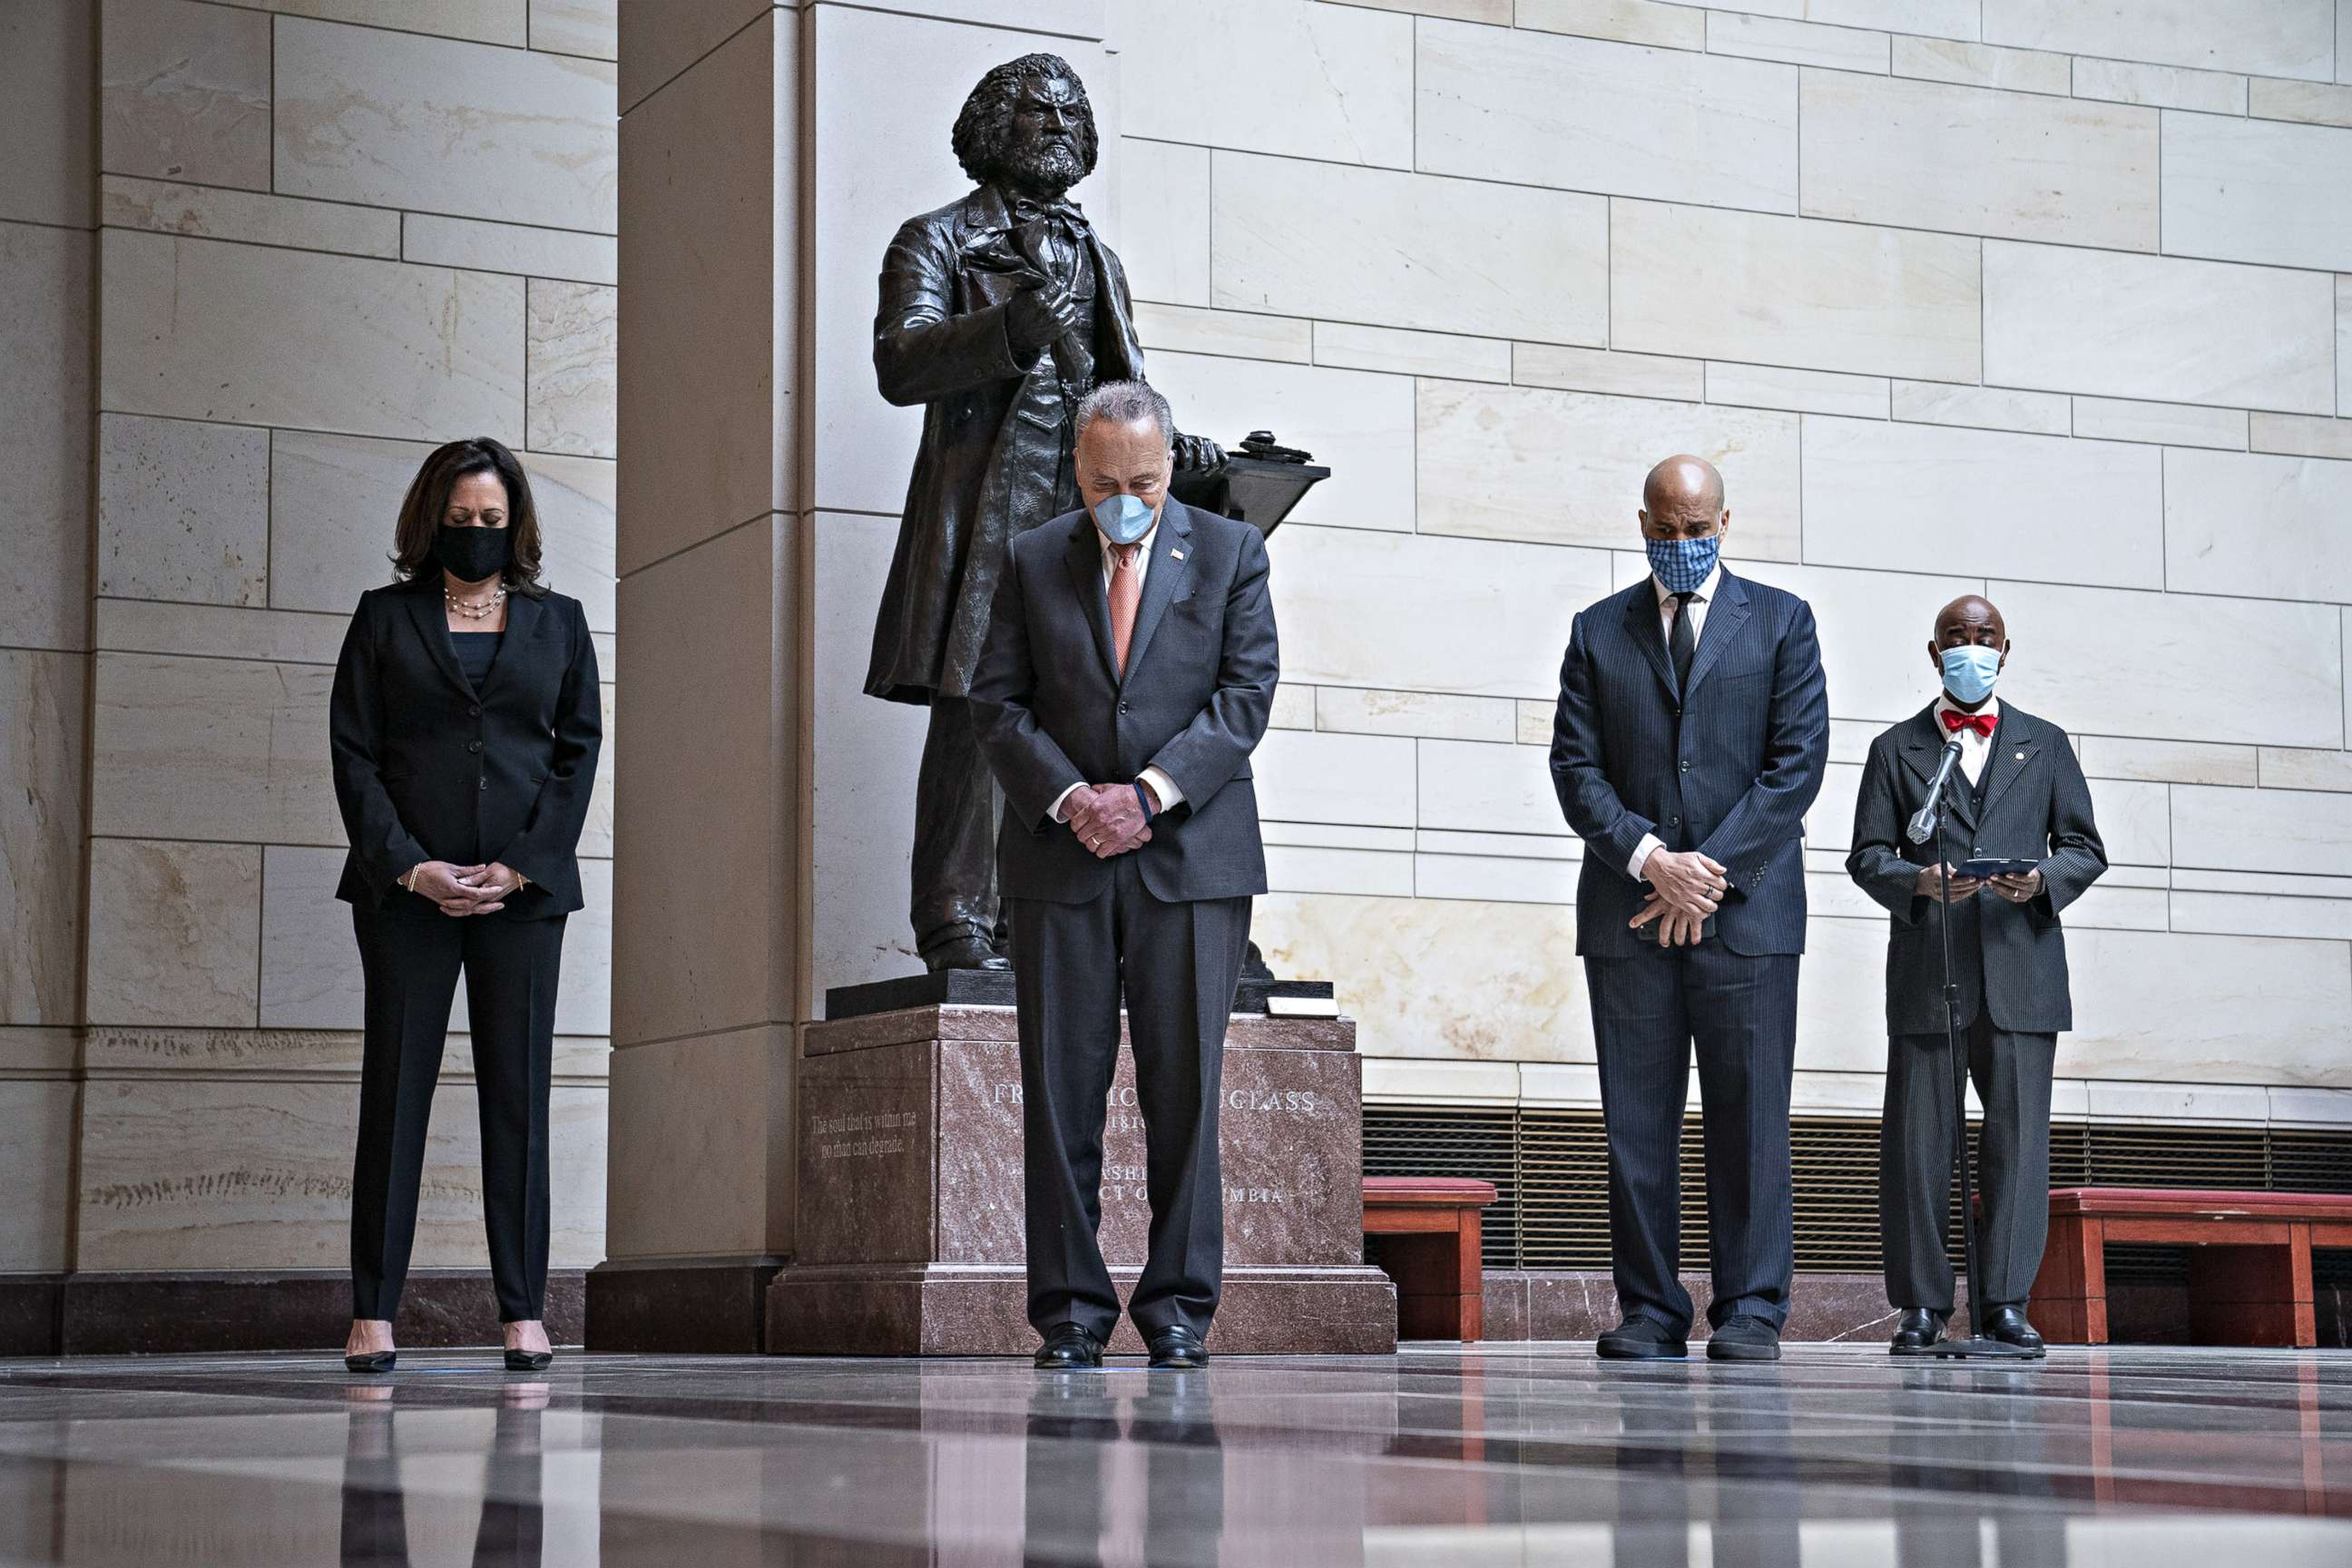 PHOTO: Senate Democrats, including Sen. Kamala Harris, Senate Minority Leader Chuck Schumer and Sen. Cory Booker, participate in a moment of silence to honor George Floyd at the U.S. Capitol, on June 4, 2020, in Washington.